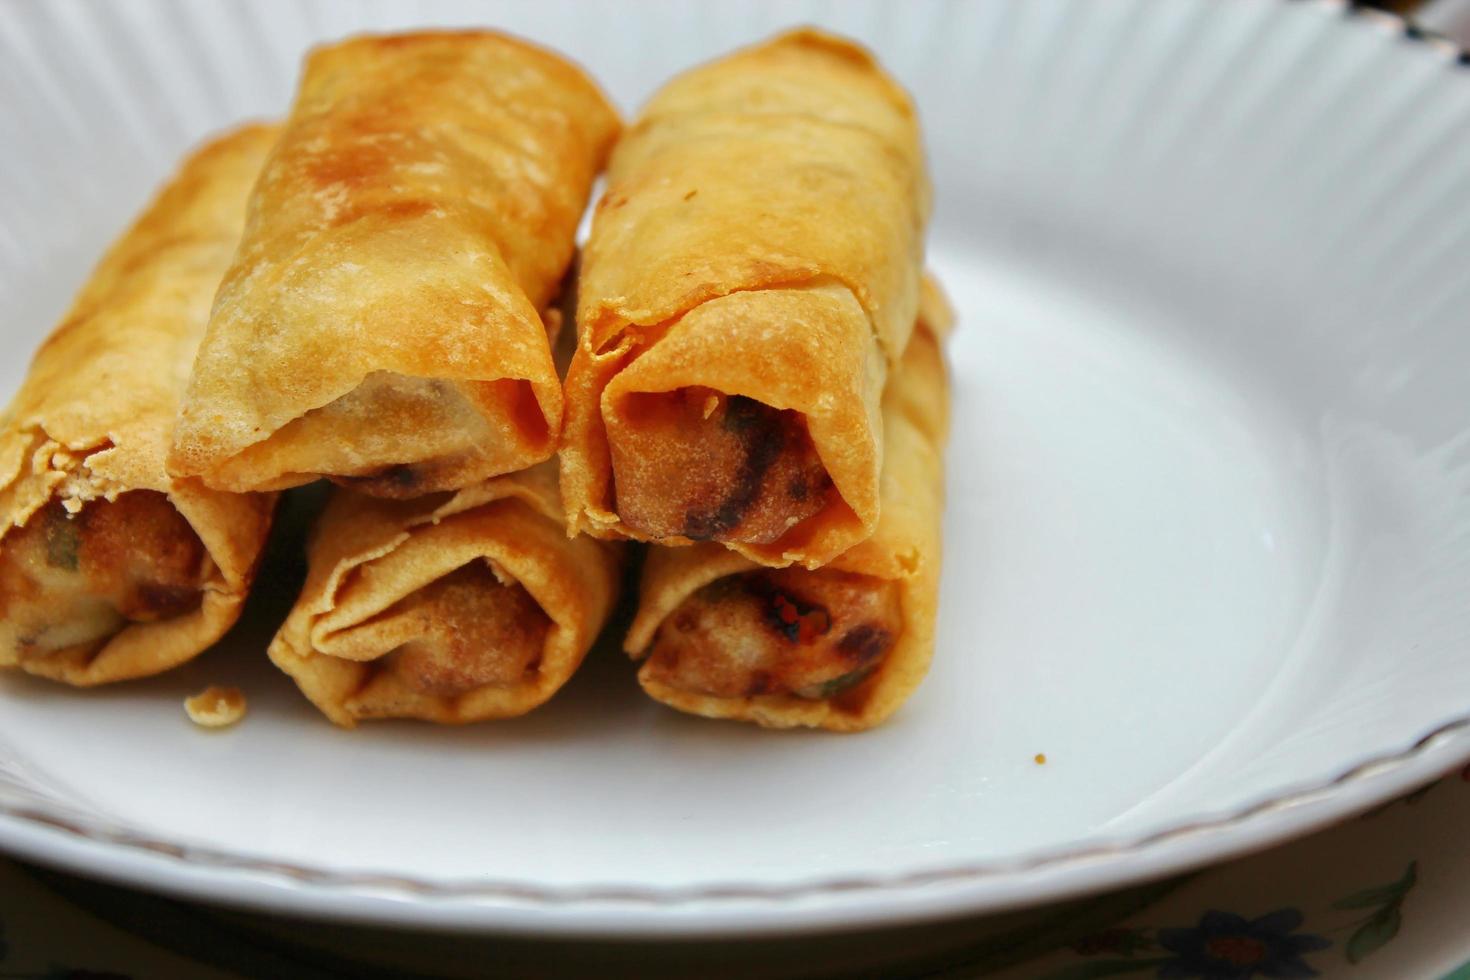 Fried spring rolls placed in a white plate, fried spring rolls are a popular Asian dish. photo